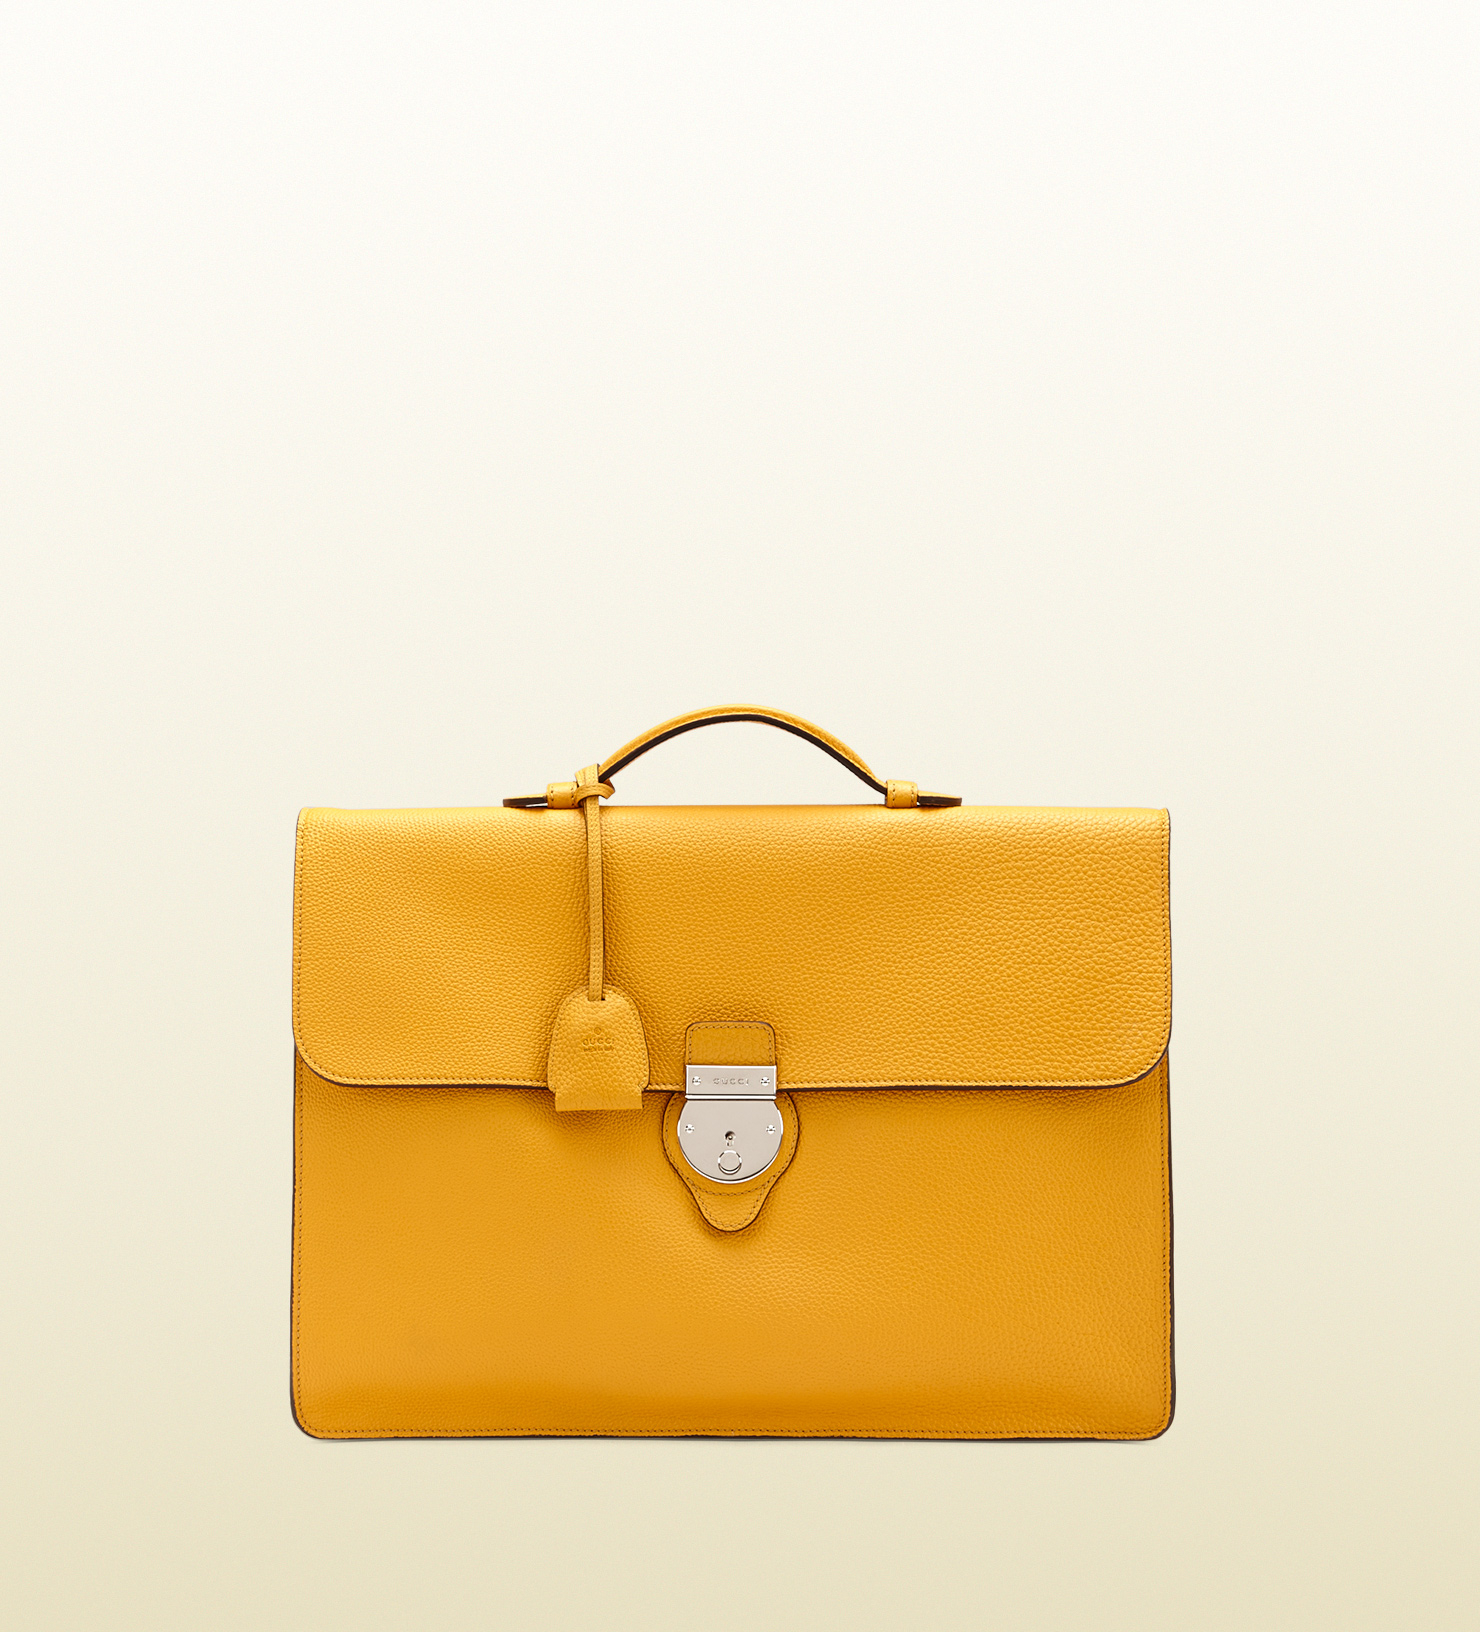 Lyst - Gucci Leather Briefcase in Yellow for Men